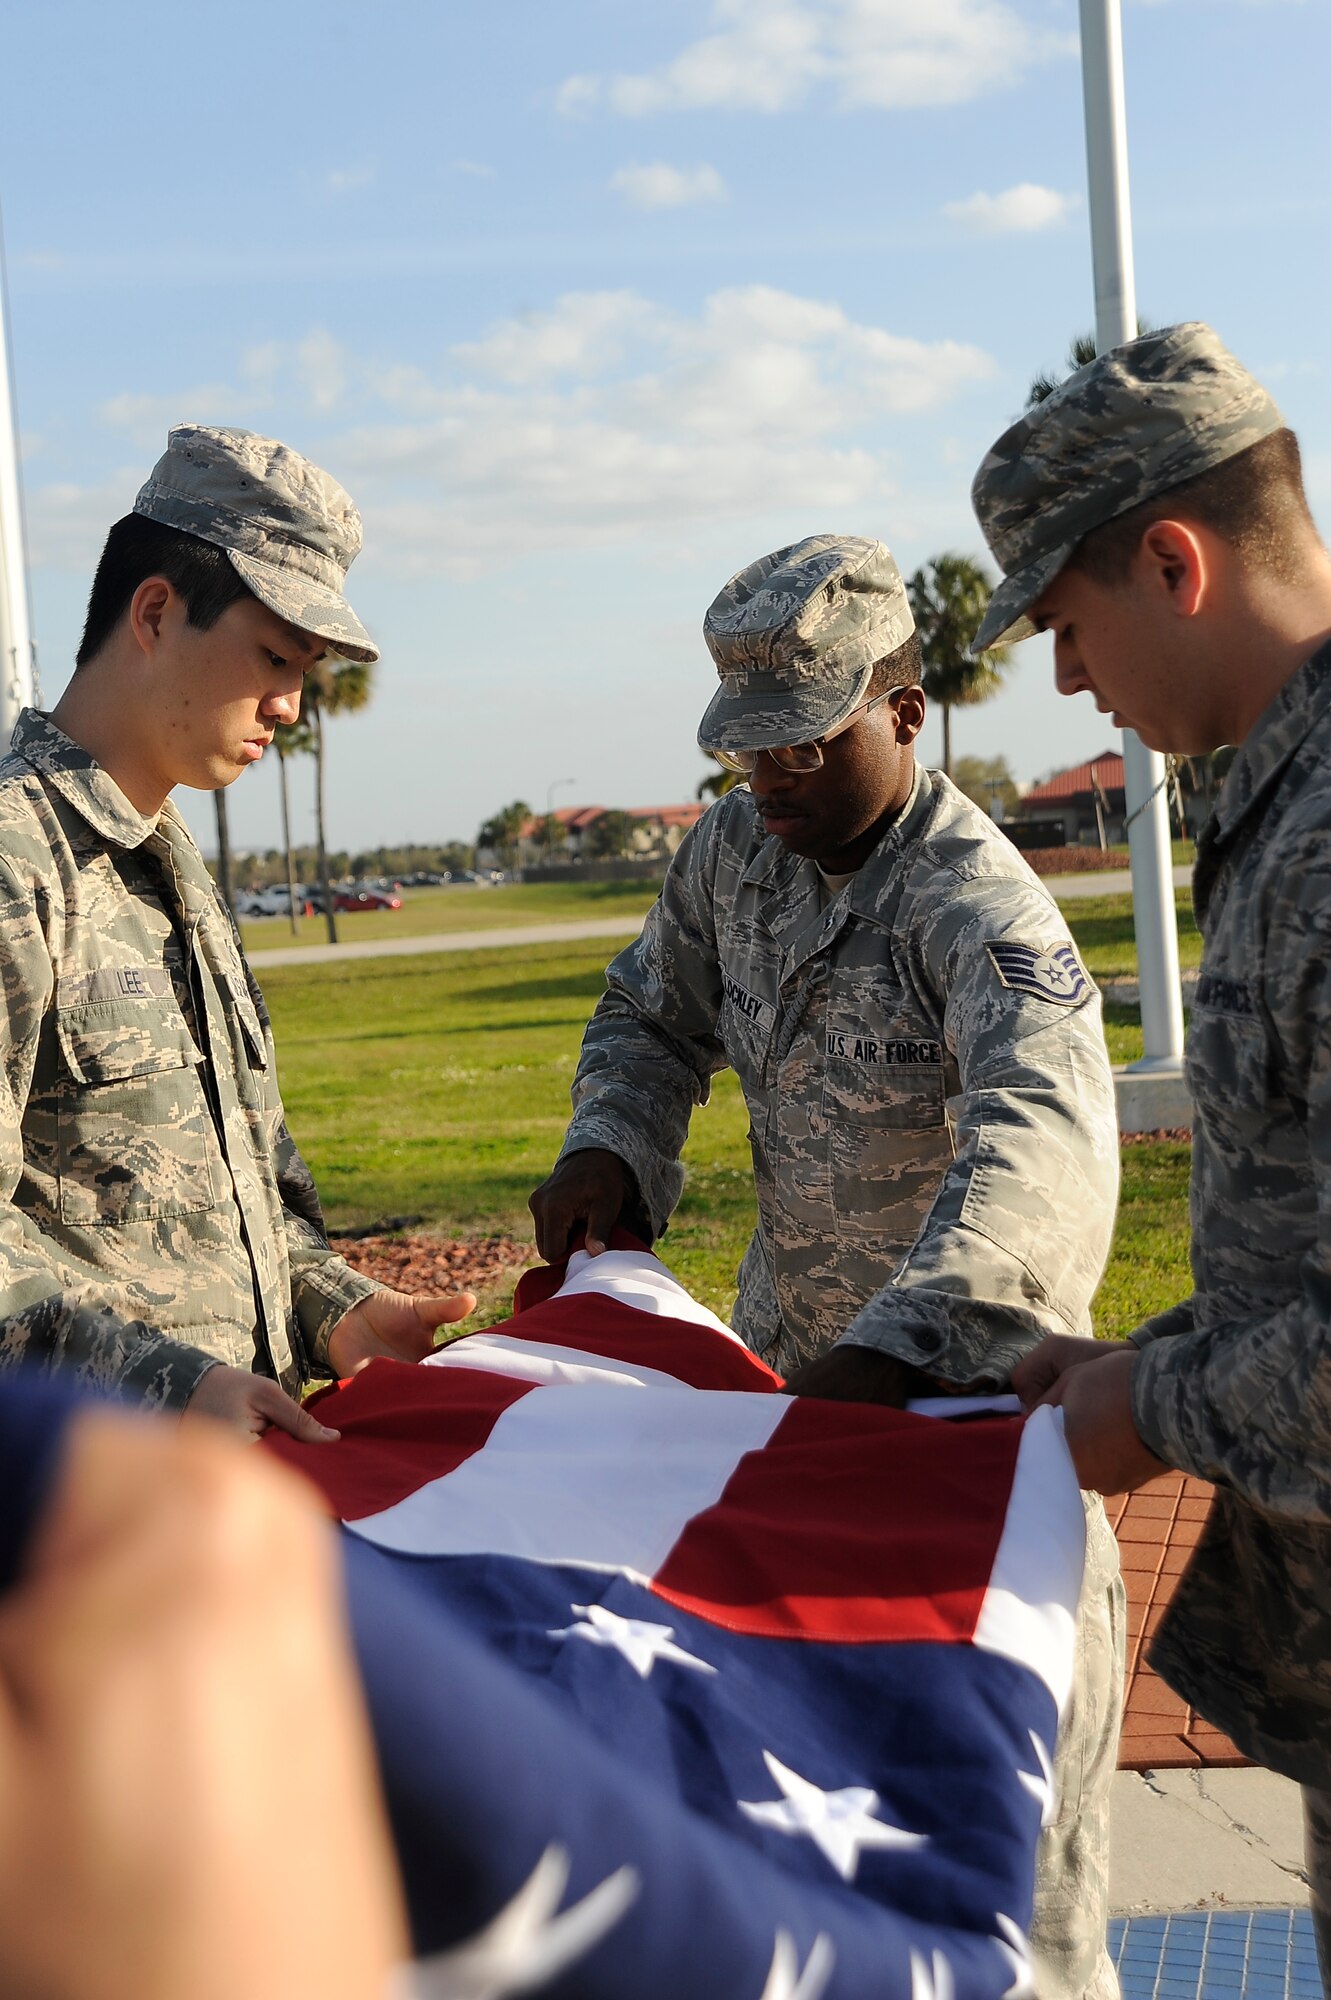 Airman 1st Class Horyeong Lee, left, Staff Sgt. Dominique Lockley, center, and Staff Sgt. Jared Metcalfe, right, flag detail members, fold the American flag during a retreat ceremony at MacDill Air Force Base Fla., March 9, 2016. Retreat is a time-honored event, which has been performed for centuries.  (U.S. Air Force photo by Airman 1st Class Mariette Adams)